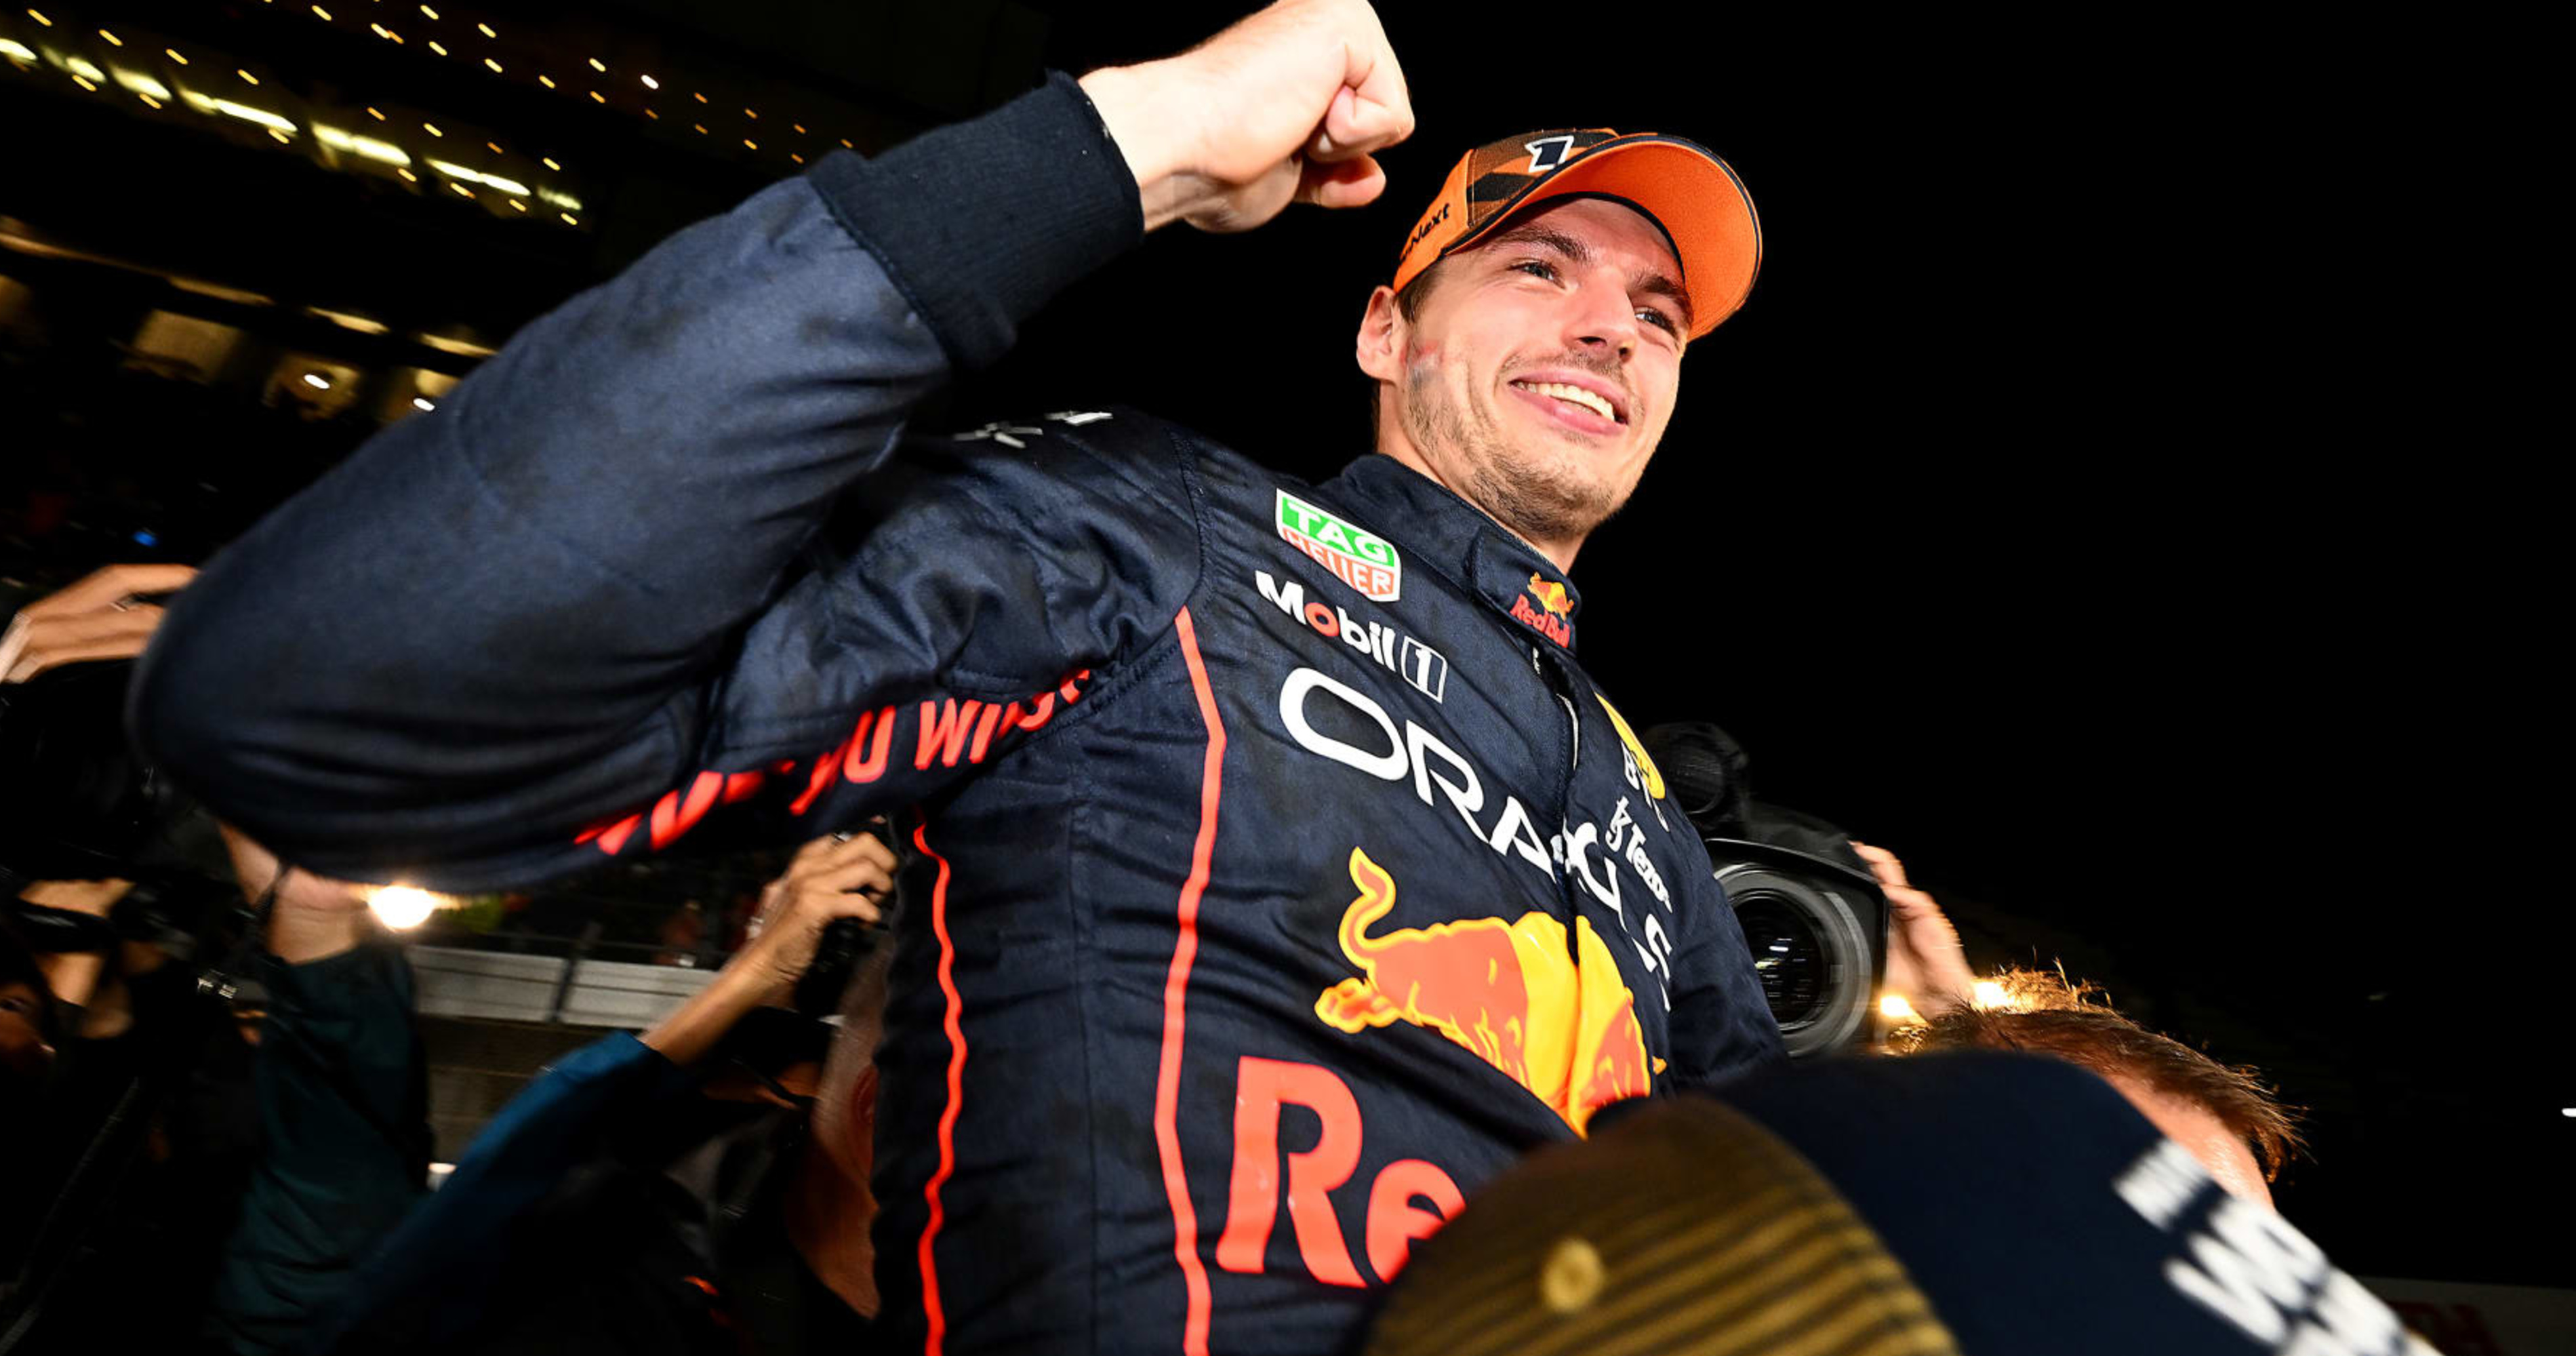 F1 - Welcome to the back-to-back world champion club, Max 😉